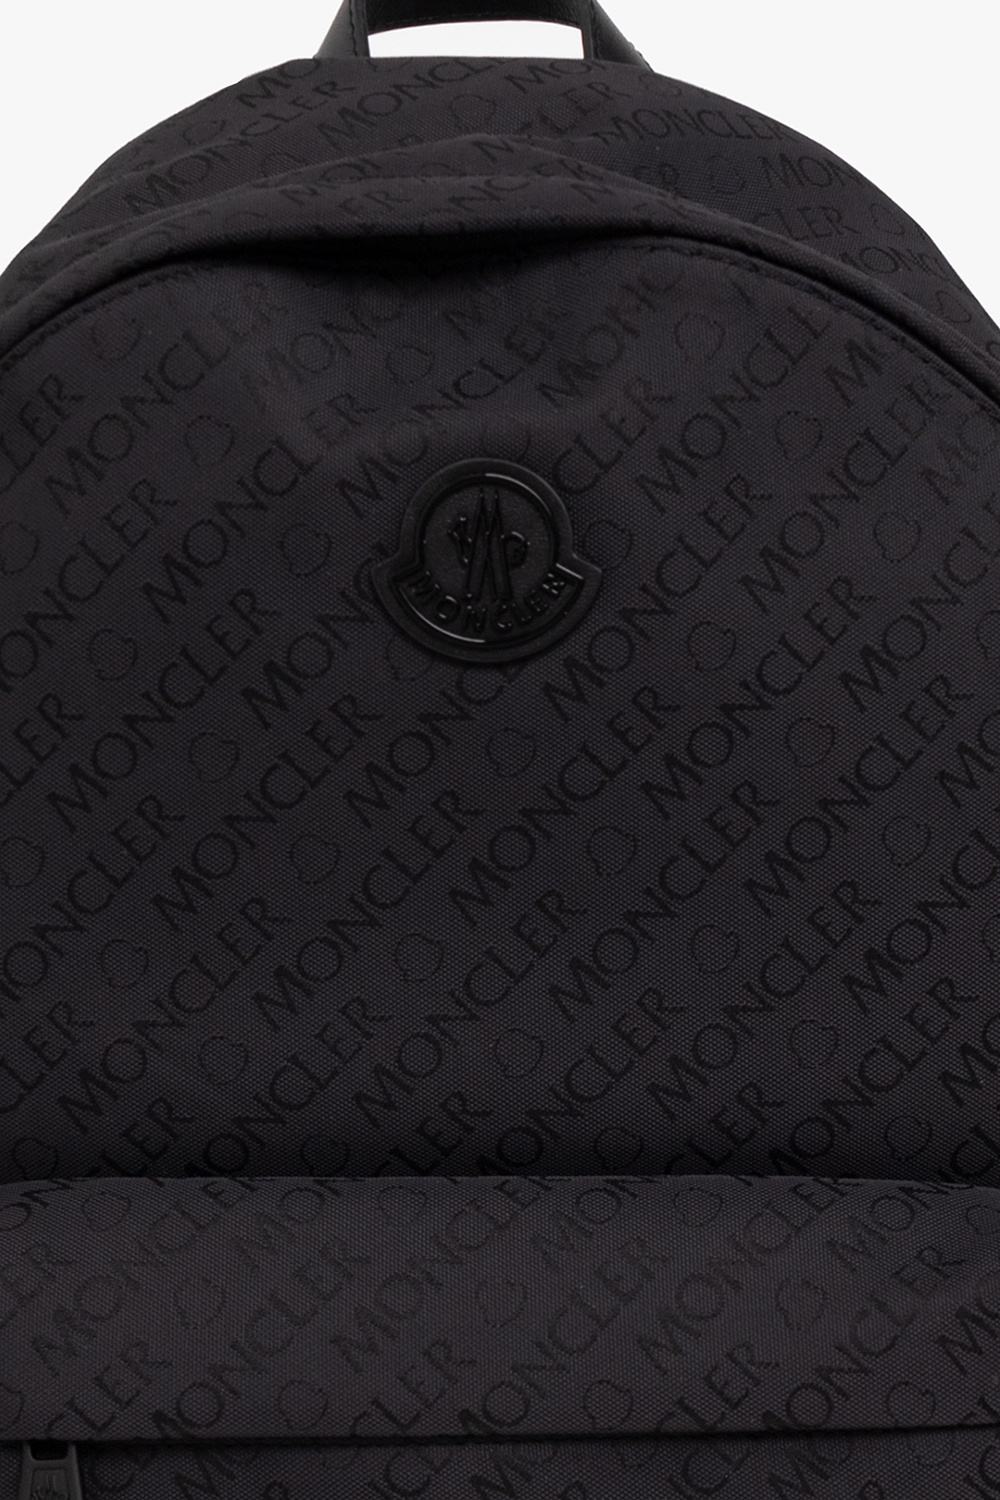 Moncler I really wish that I liked the functionality of a bucket bag because that Vince Camuto is gorgeous